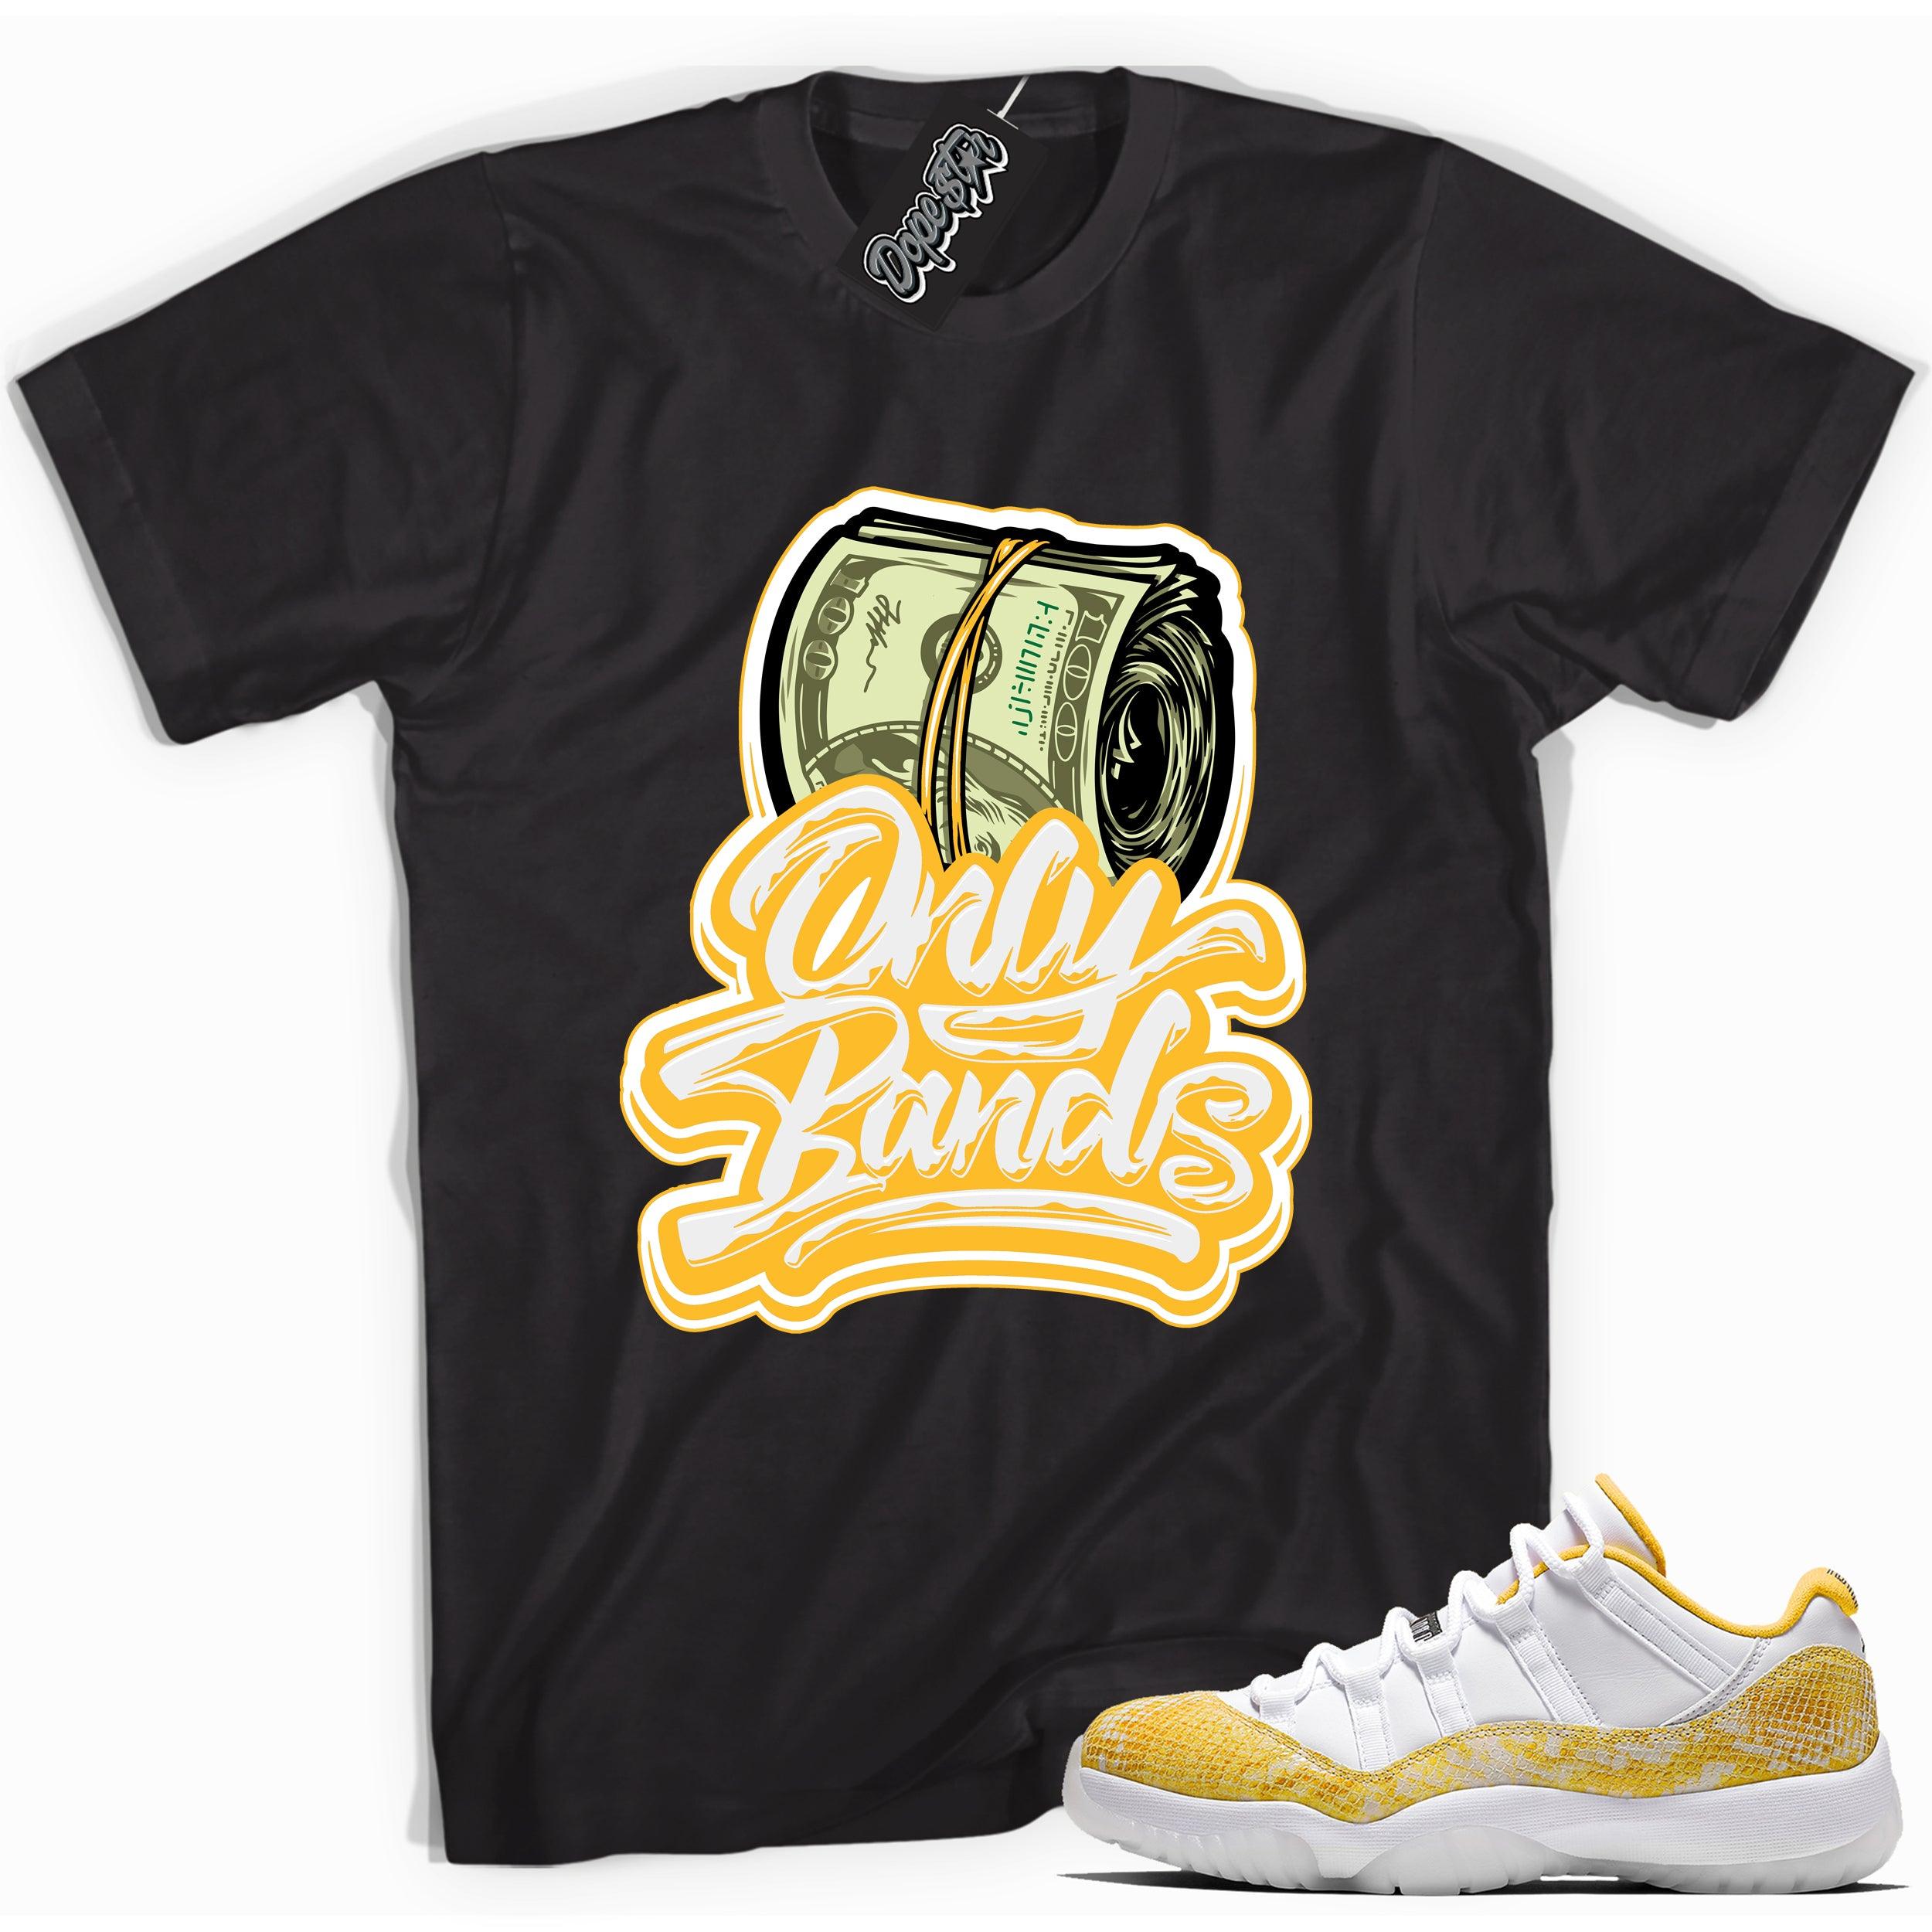 Cool black graphic tee with 'only bands' print, that perfectly matches  Air Jordan 11 Retro Low Yellow Snakeskin sneakers